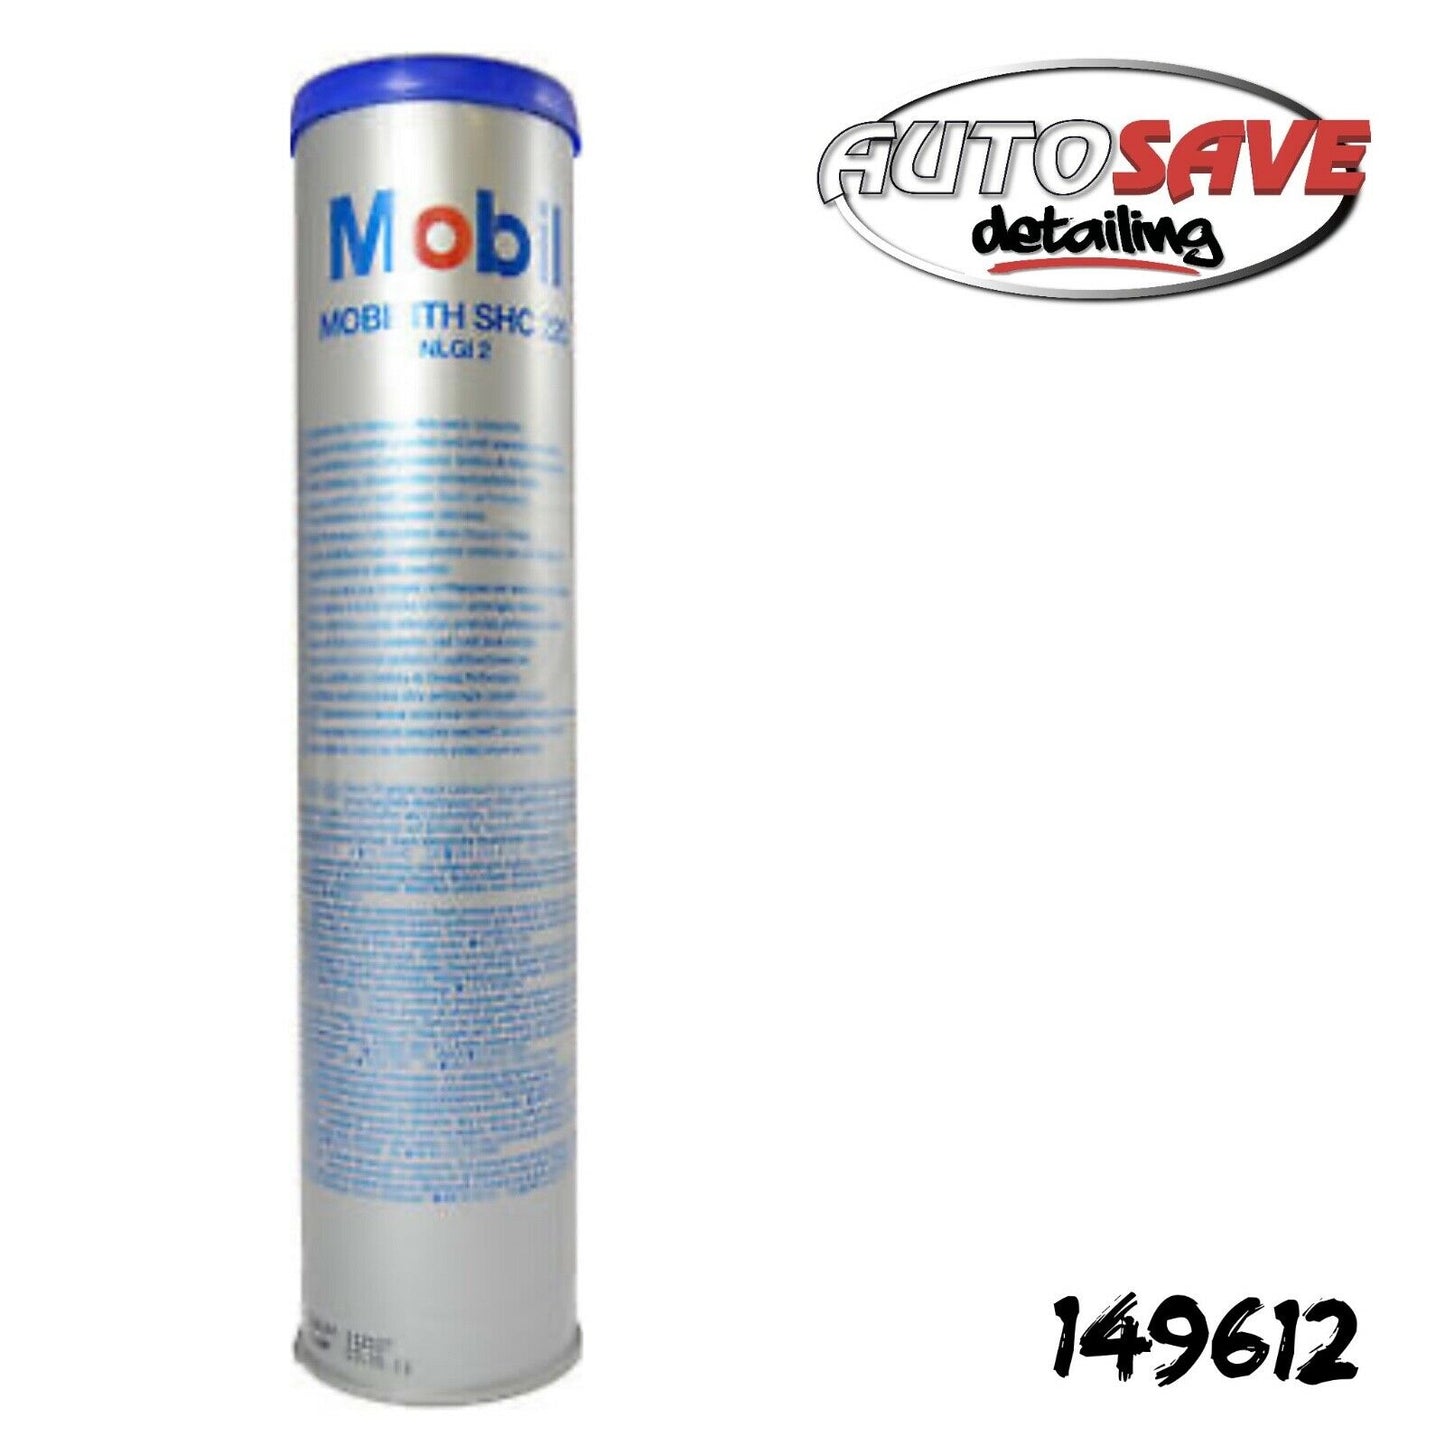 Mobil Mobilith SHC 220 Red Lithium Grease 380g Cartridge